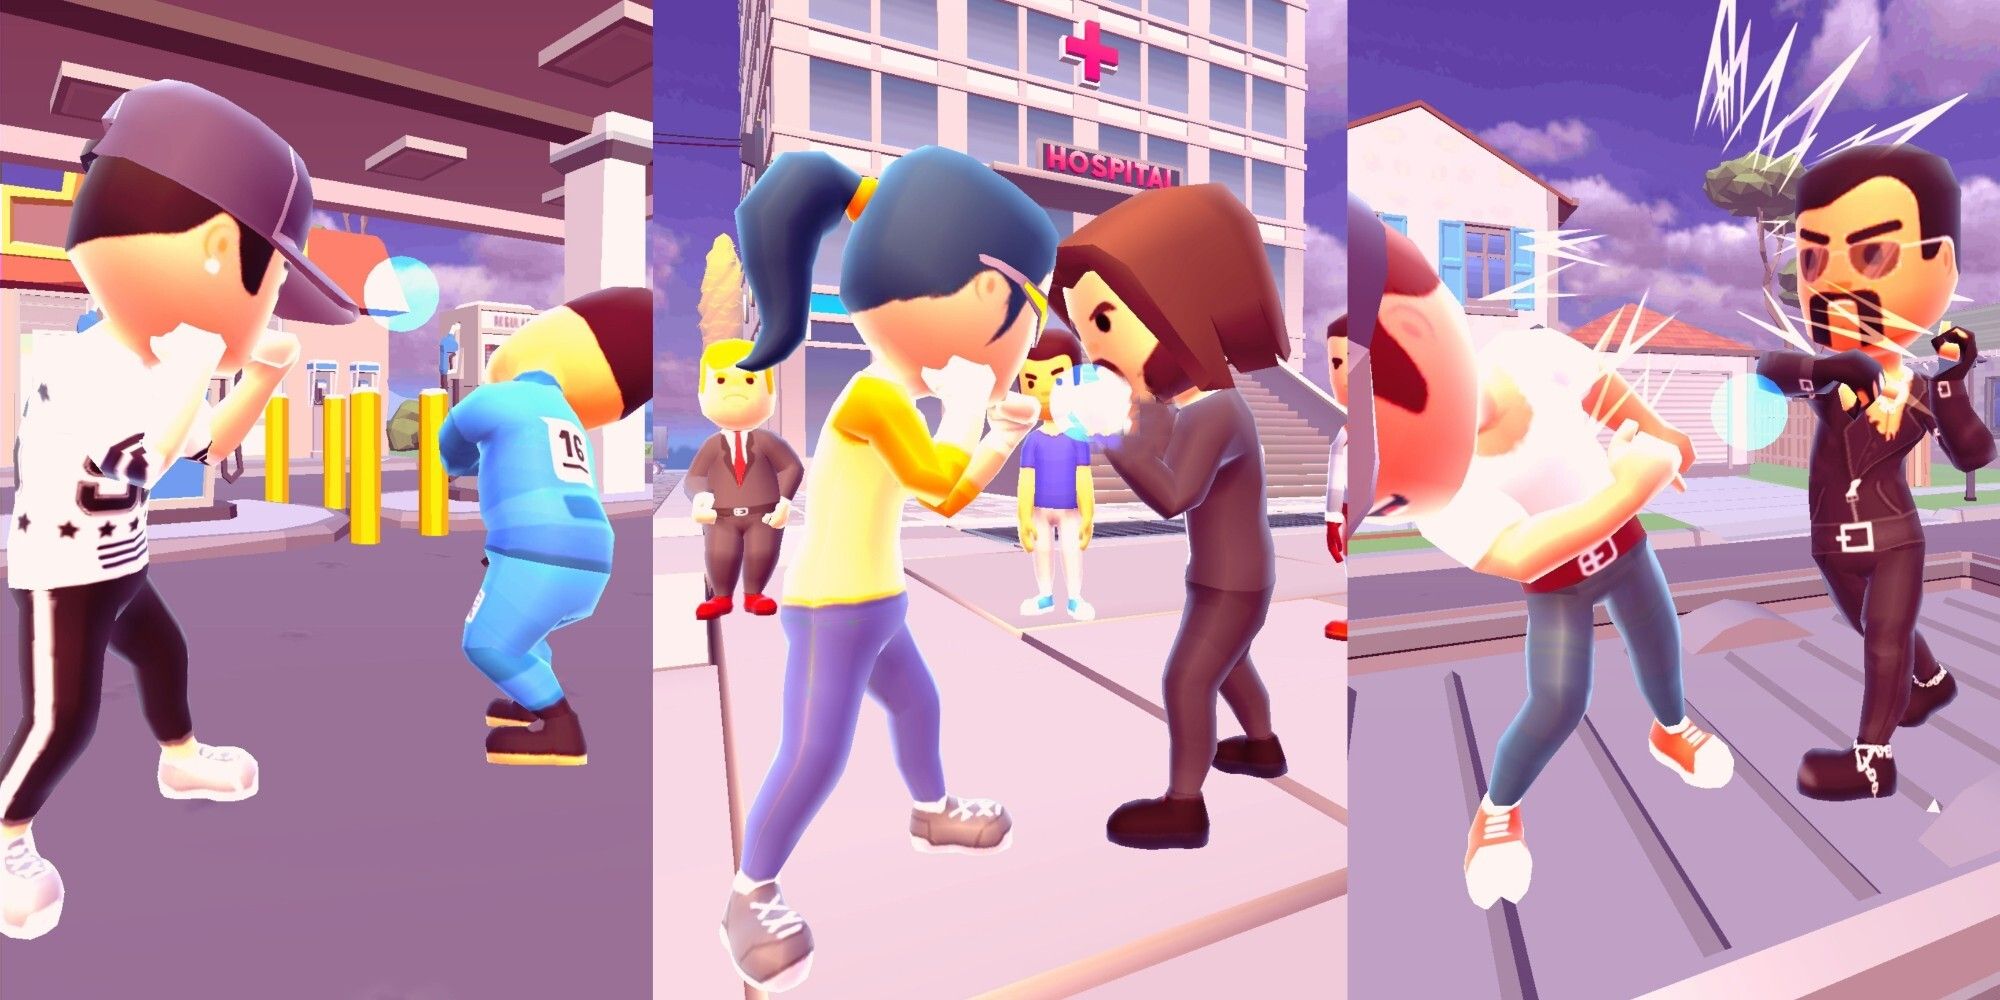 Swipe Fight! split image of characters fighting each other in different locations